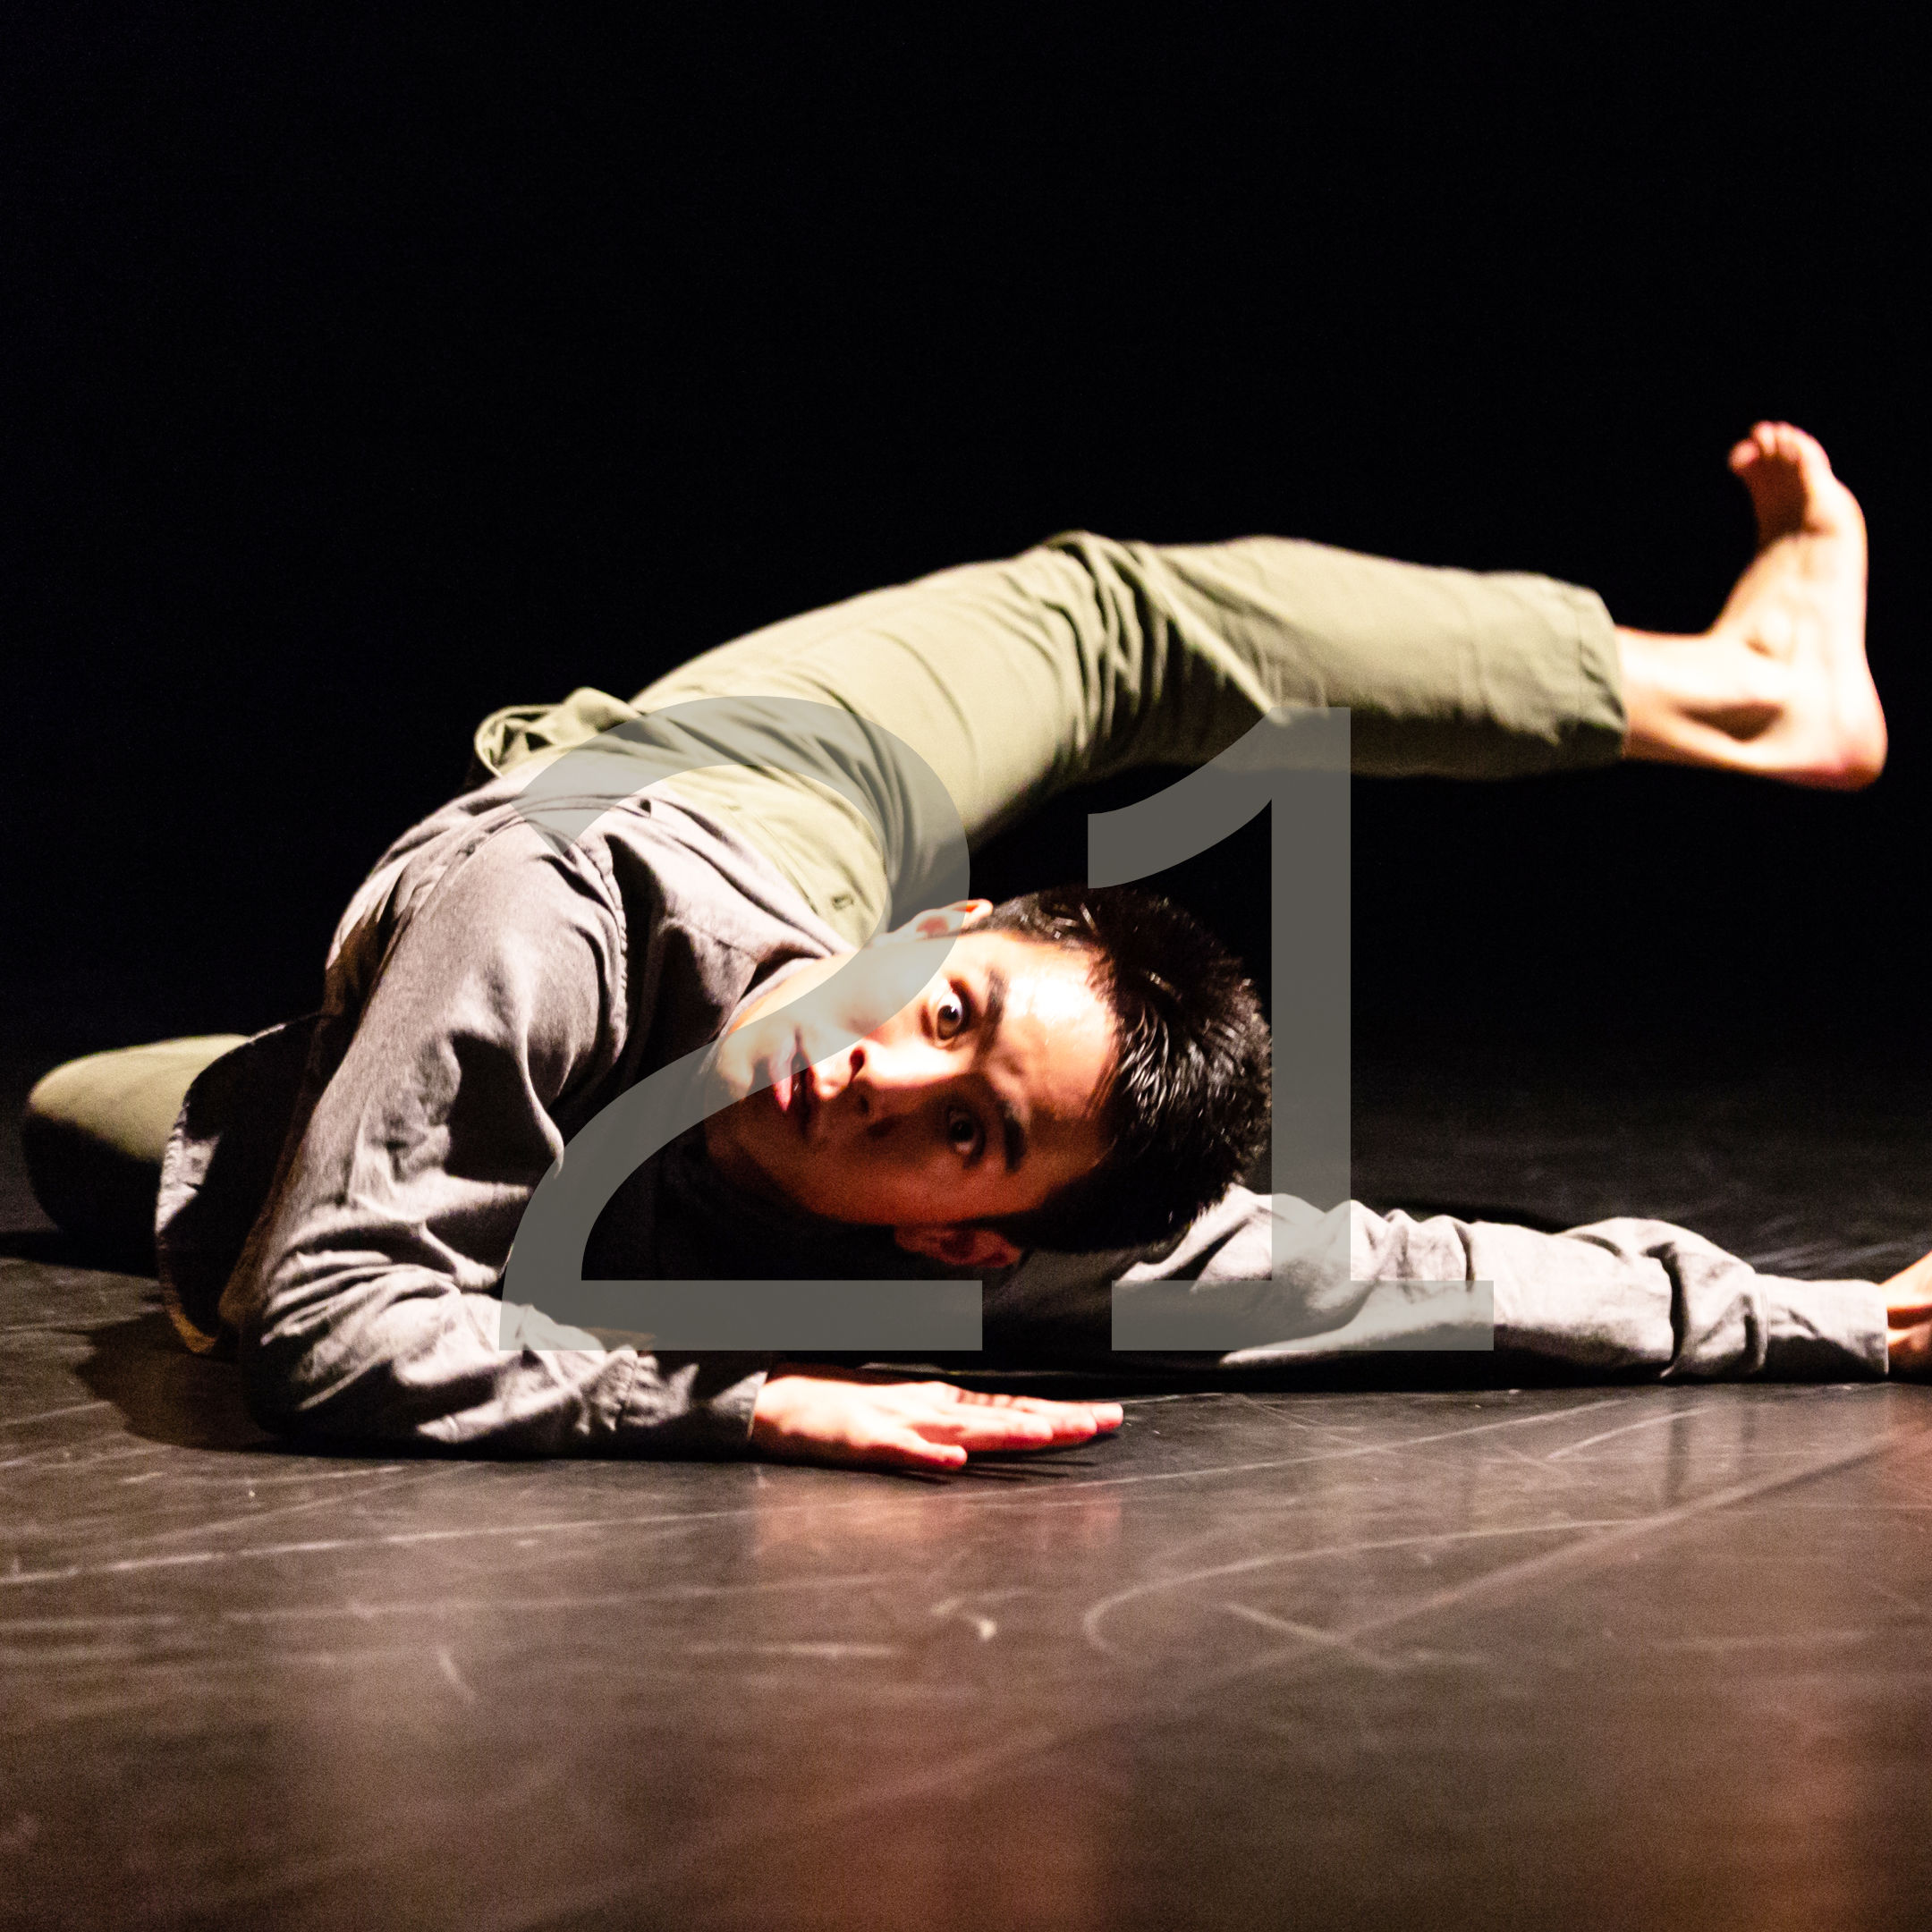 Union PDX - Festival:21 artist Tom Tsai performs his work 'A Place to Call Home' with a mix of break-dance and contemporary movement at the Hampton Opera Center in Portland, Oregon. The number 21 overlays the image to indicate the festival year. | Photography: Kuang Jingkai